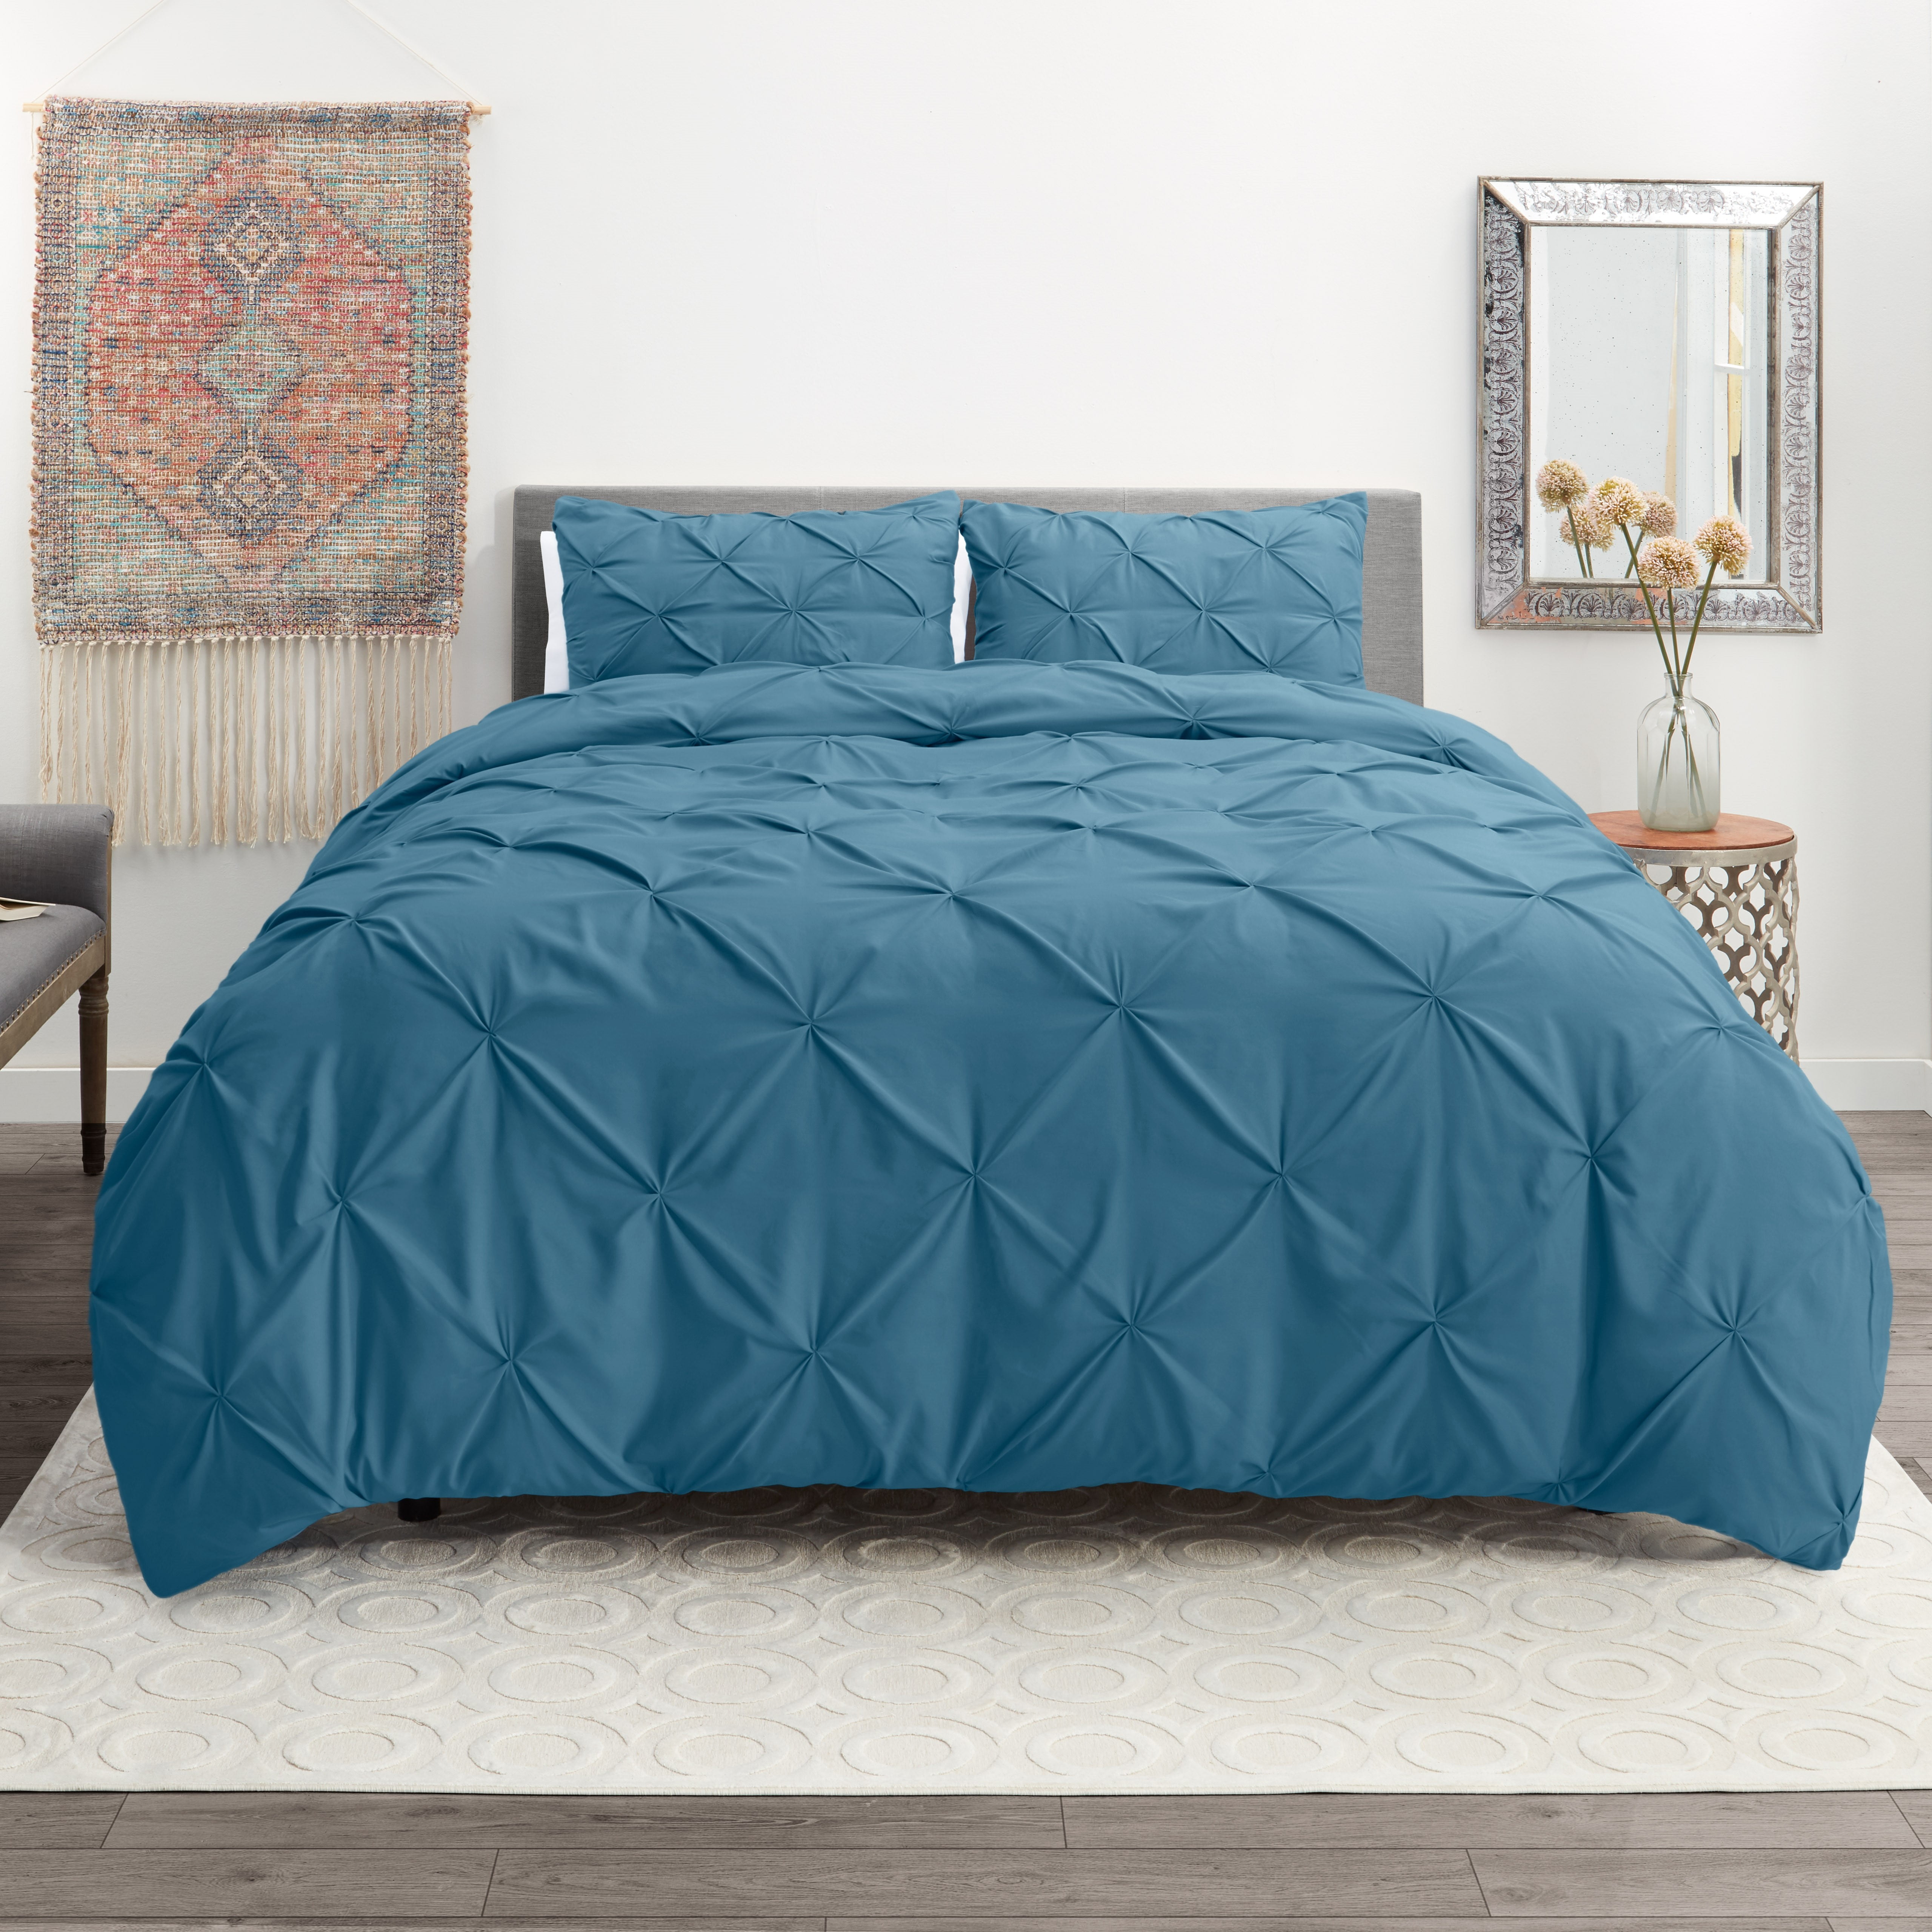 2 Piece Pinch Pleated Duvet Cover Set with Button Closure &amp; Corner Ties - 100% Soft Hypoallergenic Microfiber Pintuck Decorative Comforter Cover, Available in King Queen Full Twin and California King